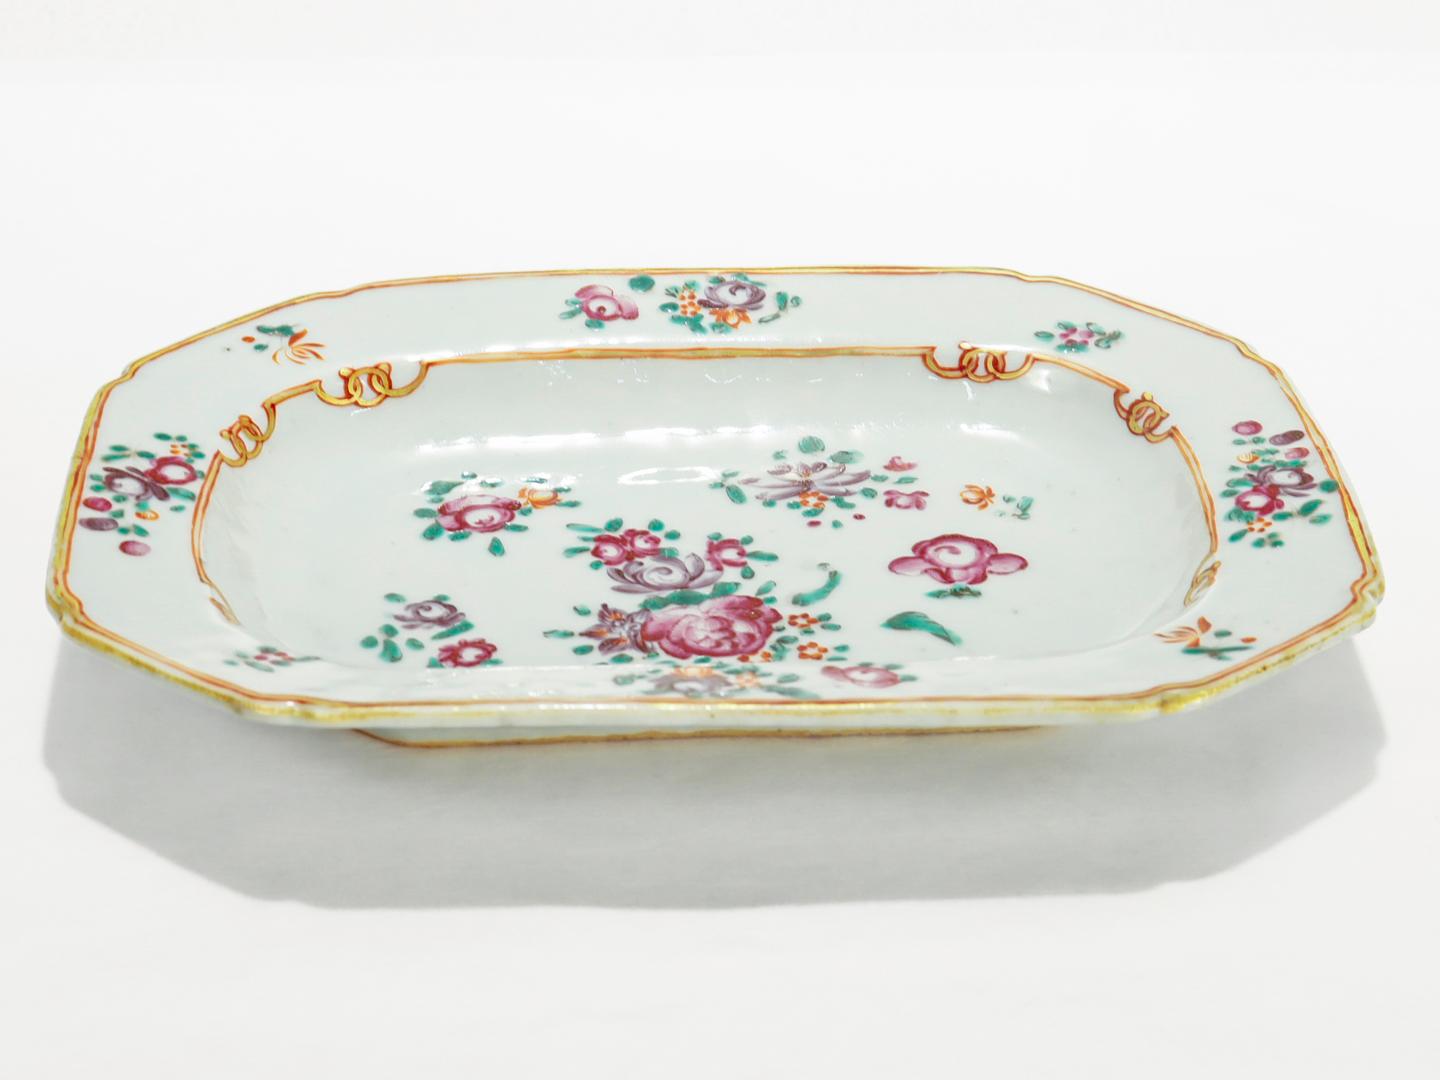 Porcelain Small Antique 18th Century Famille Rose Chinese Export Tray or Dish For Sale